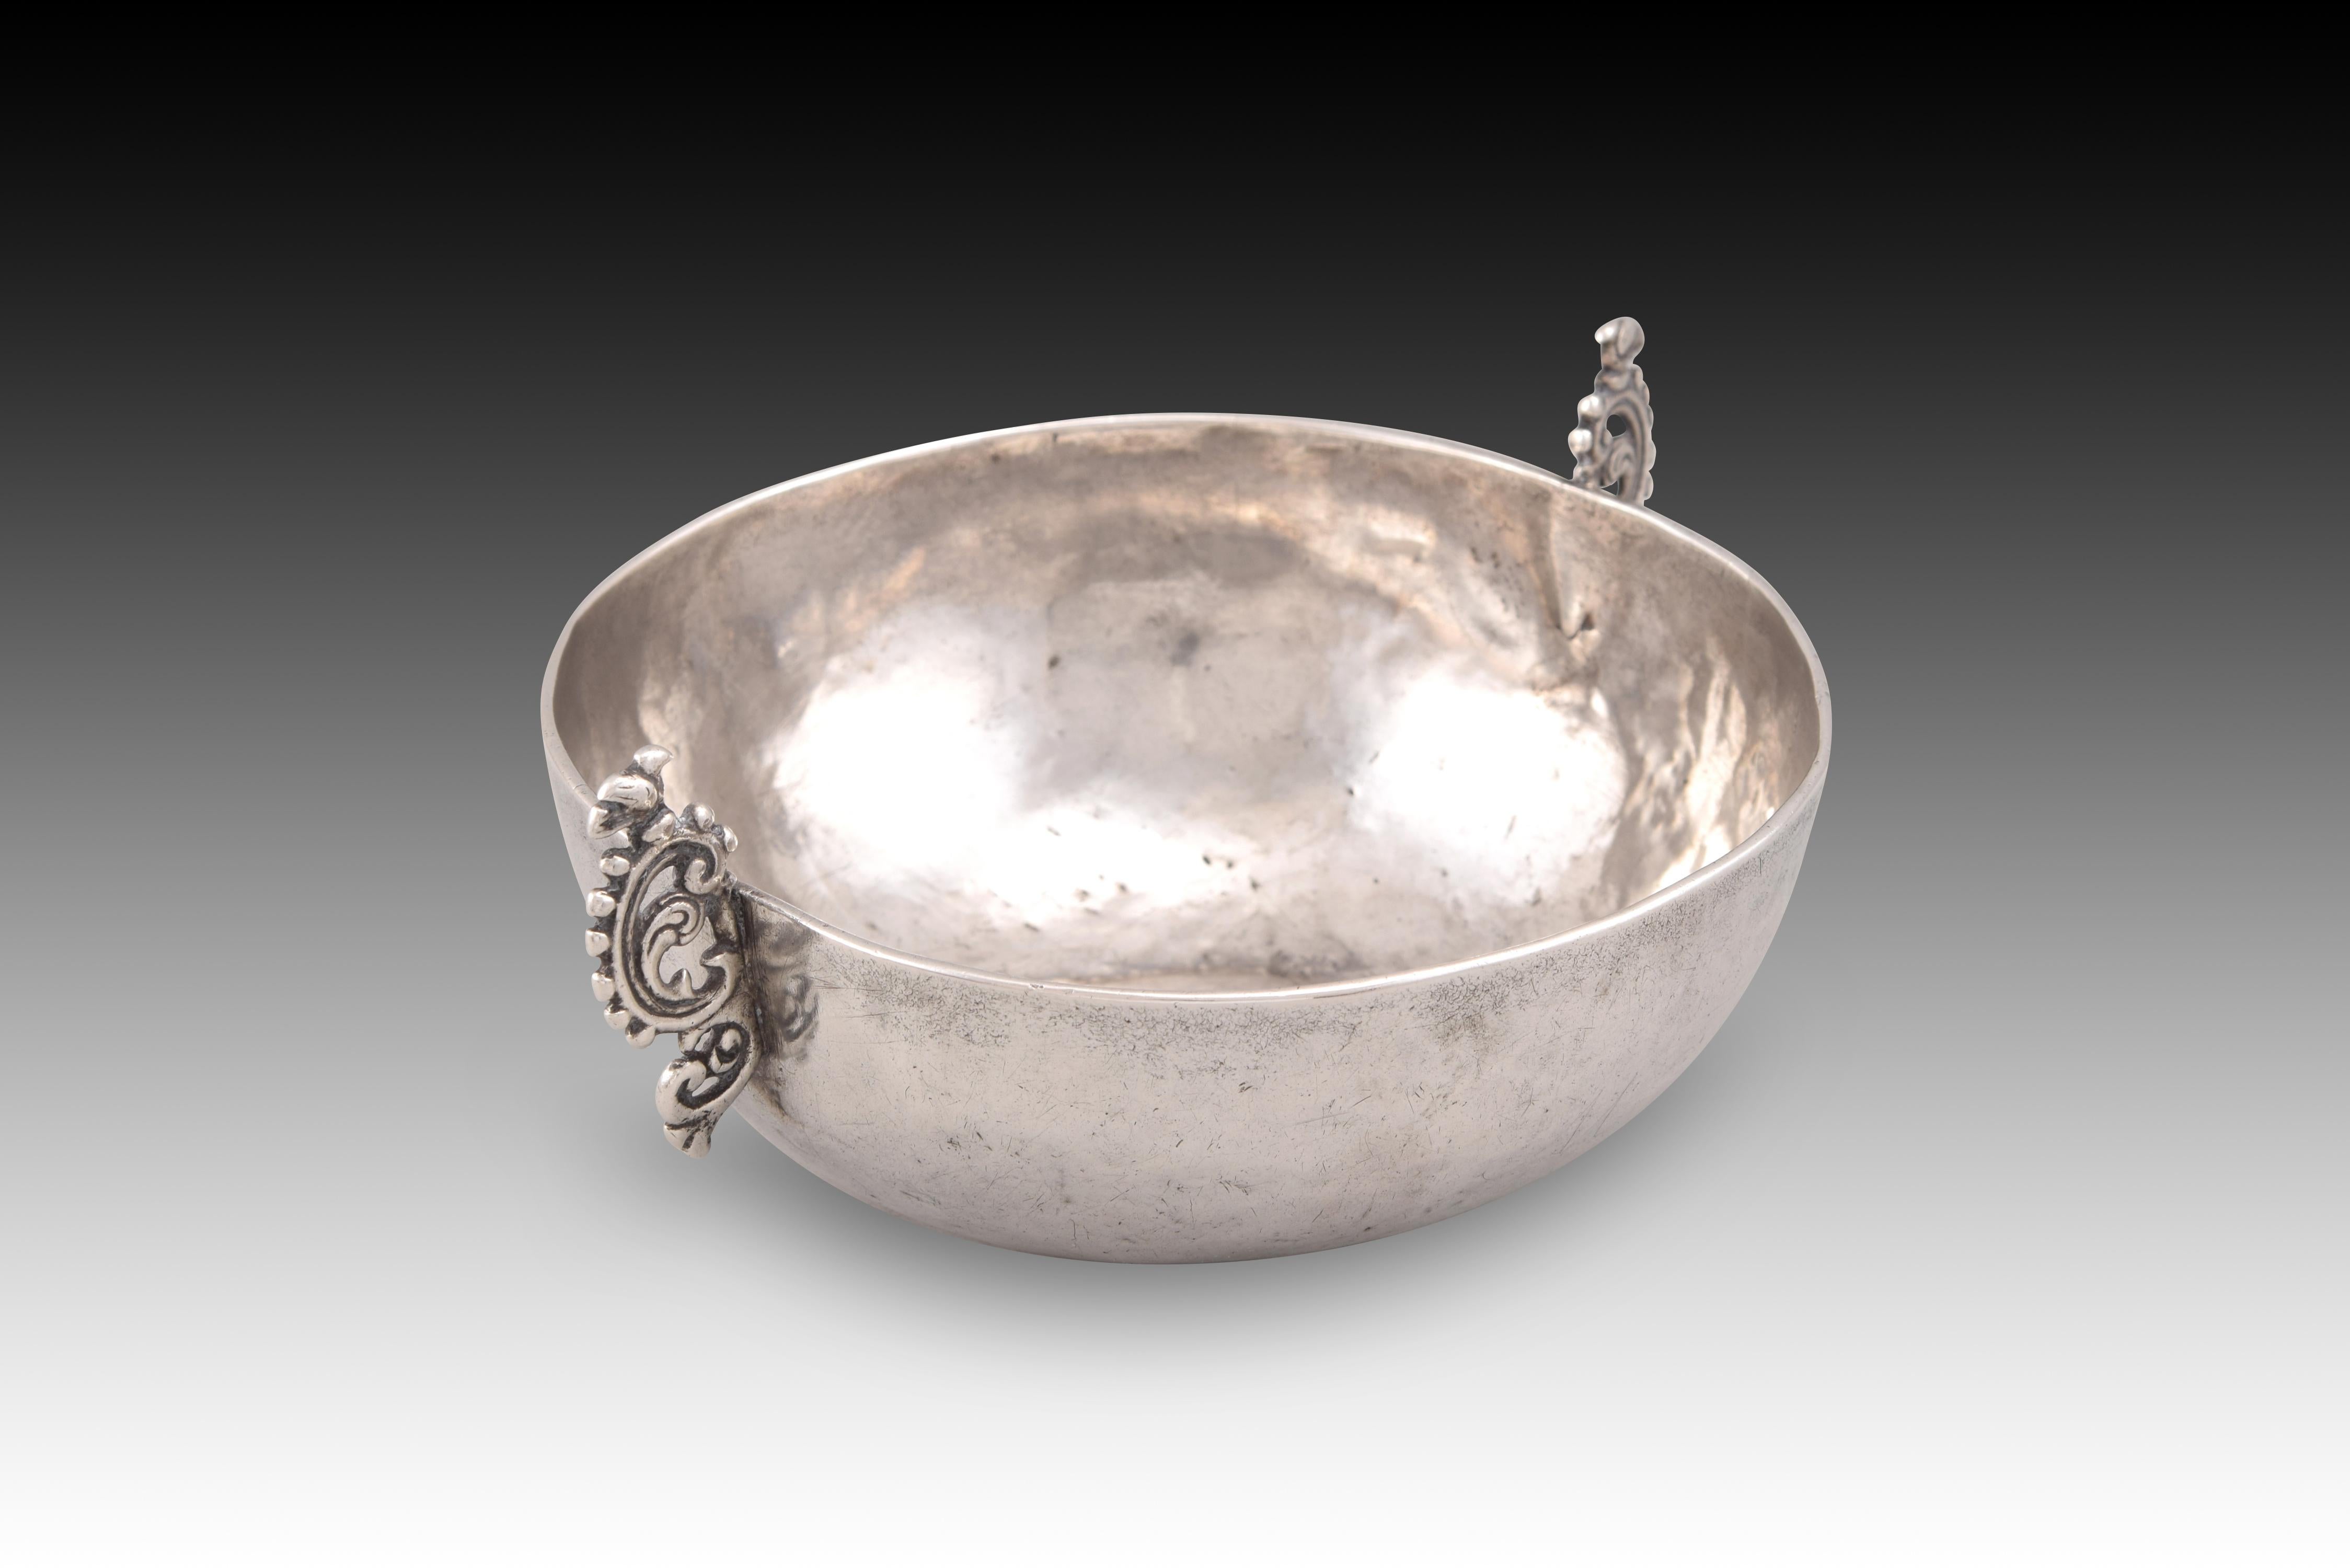 Bernegal or trembling with handles. Silver. Spain, 18th century. 
Avocado shaker in its color with a circular base, without base or foot, and a hemispherical body that is wider at the top, which has two handles on the sides. These present two